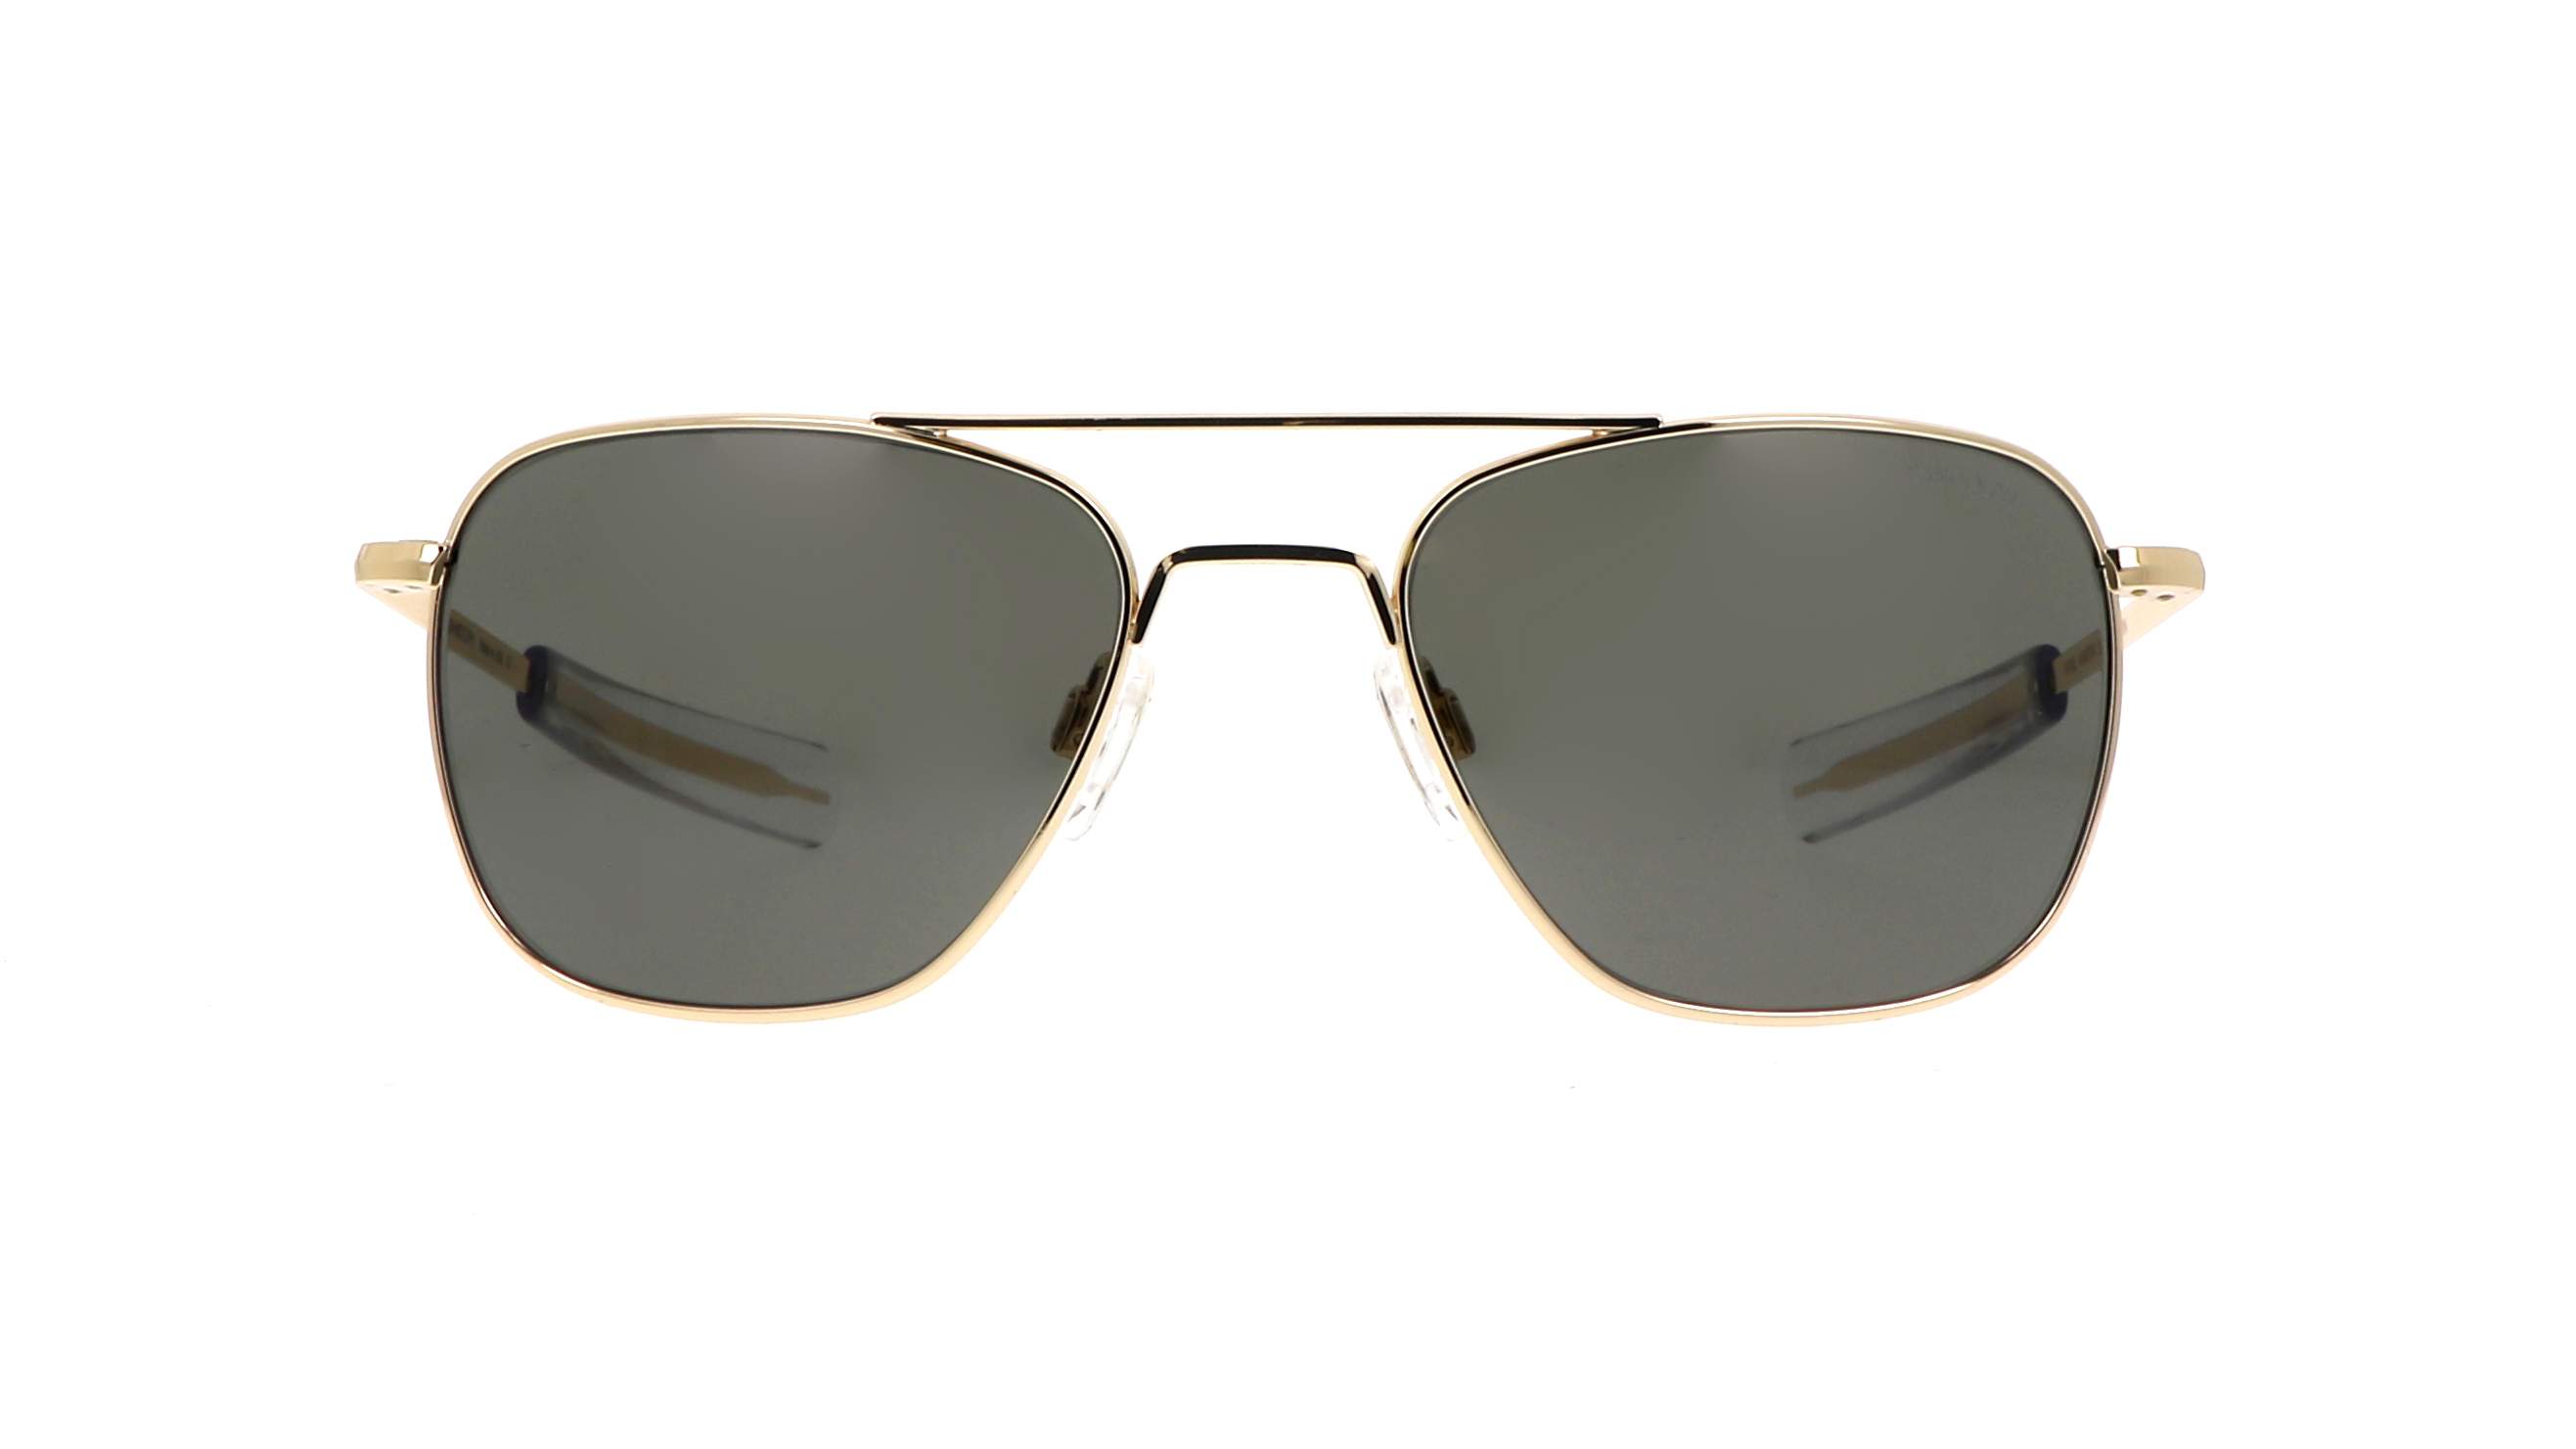 Sunglasses Randolph Aviator 23k Gold Military Special Edition Gold Af284 55 20 In Stock Price